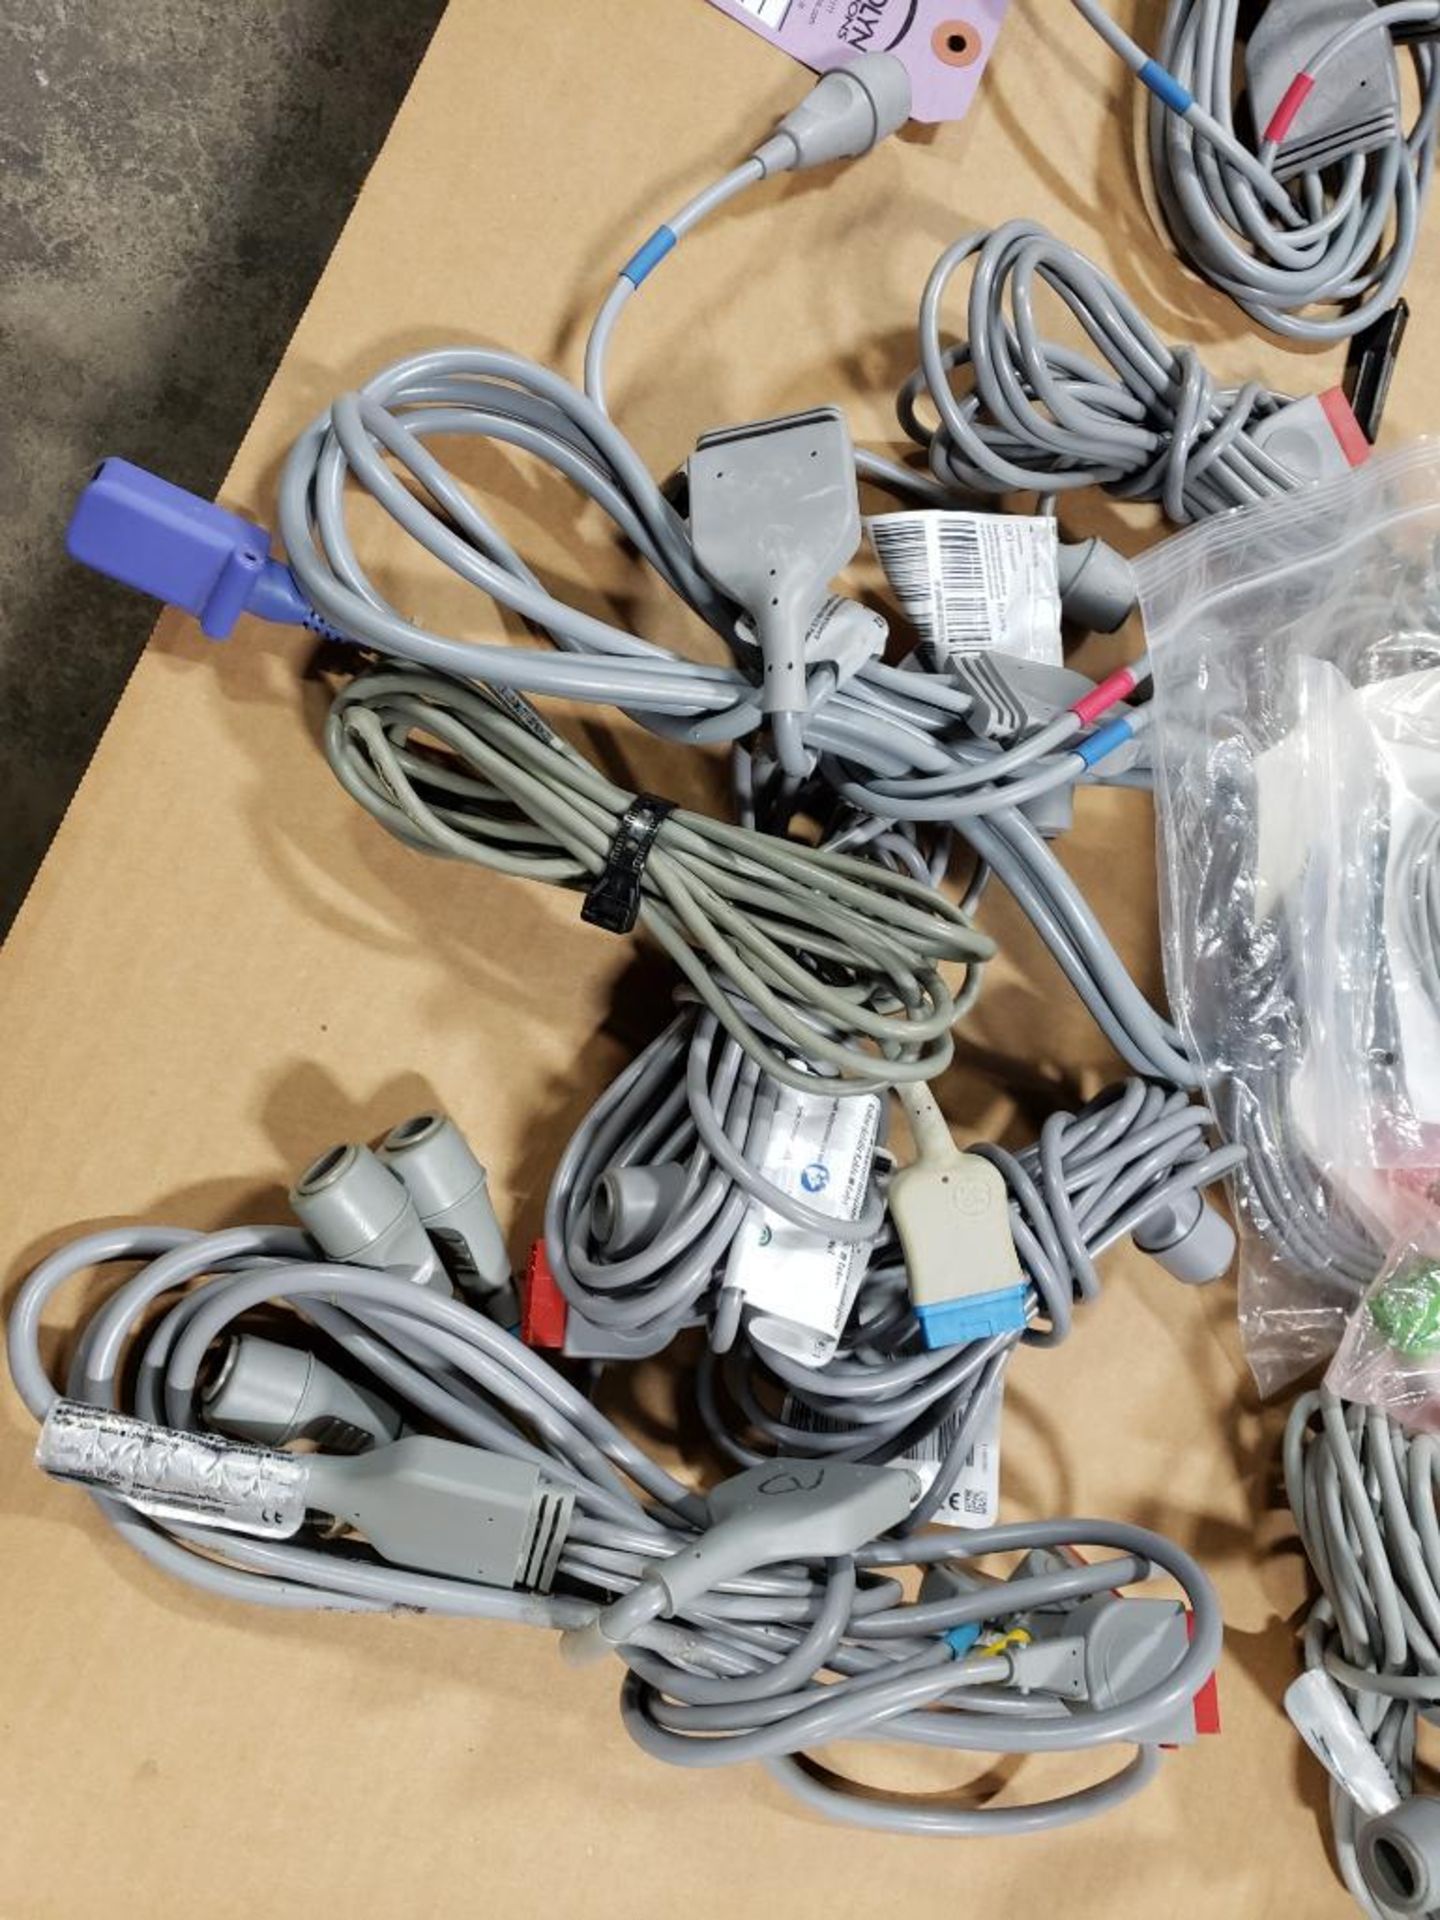 Large assortment of cords and cables. - Image 2 of 11